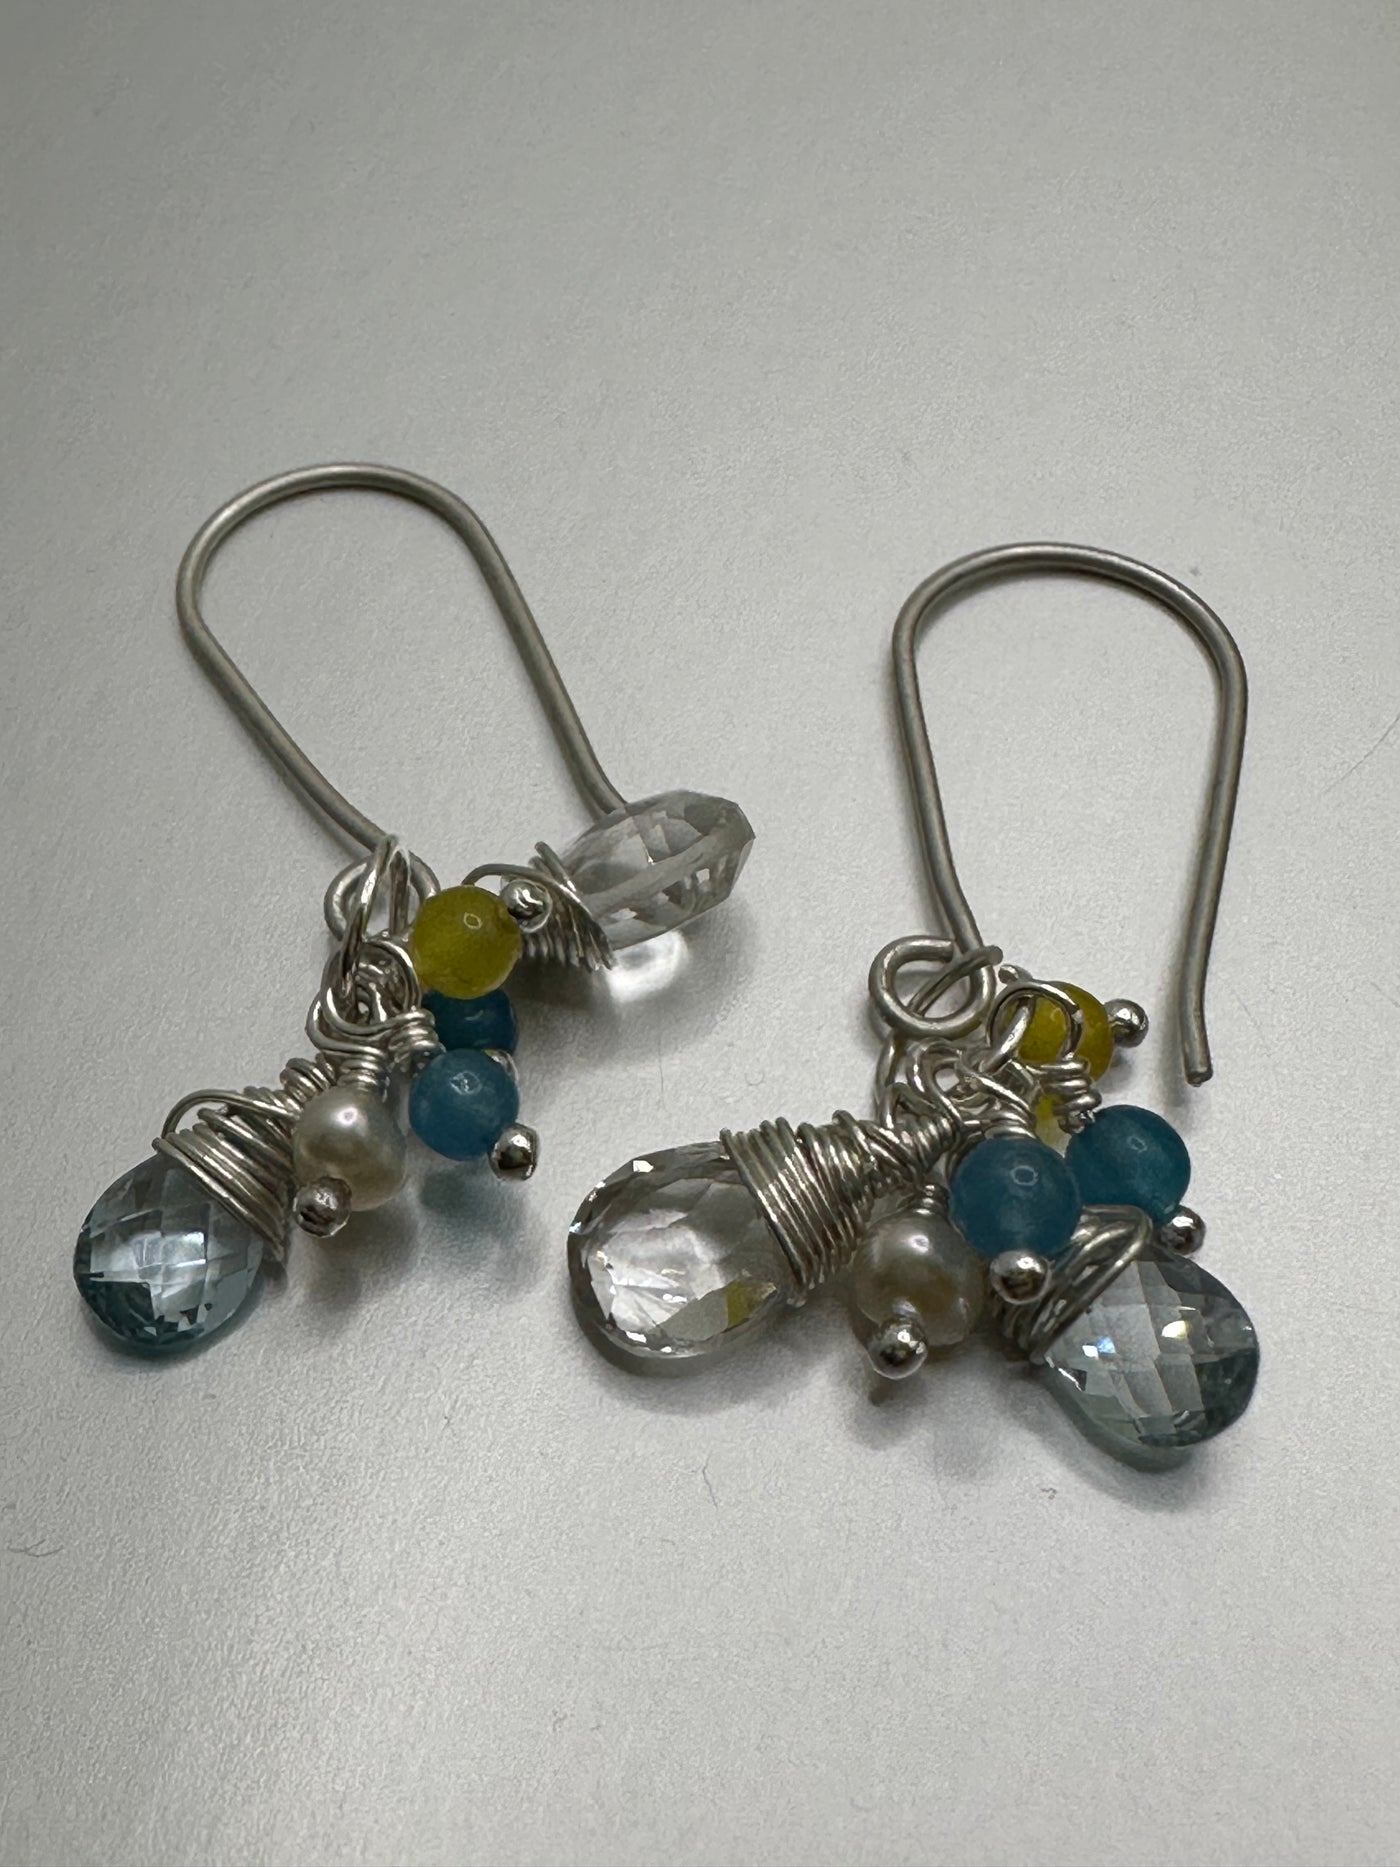 Dangling earrings with quartz briolette, pearls and yellow and blue beads